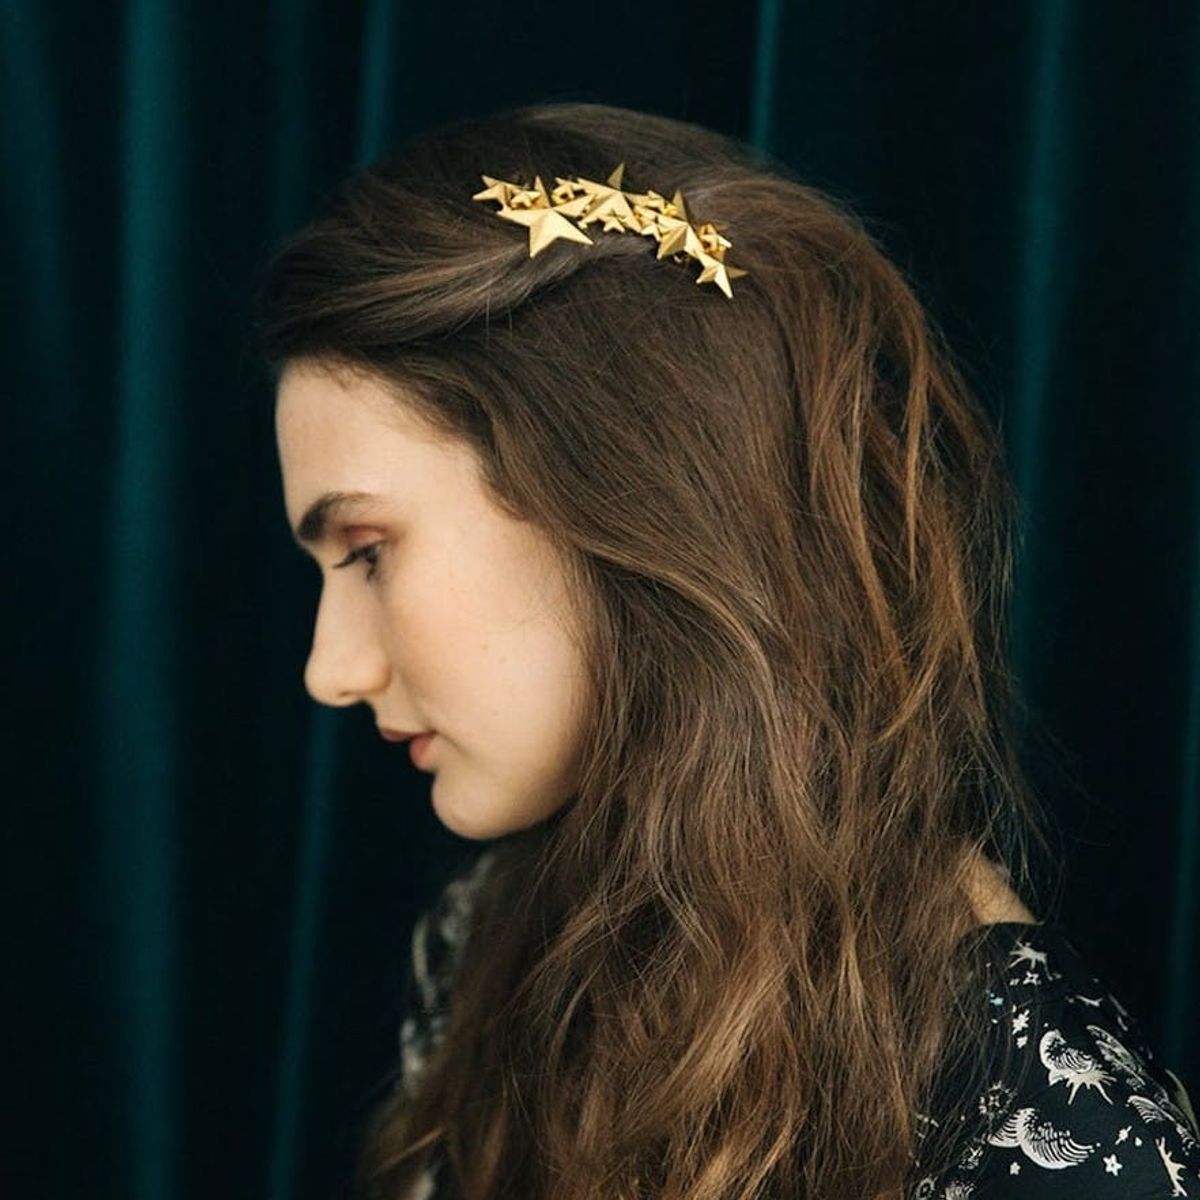 14 Extra AF Hair Accessories to Upgrade Your Holiday ‘Do